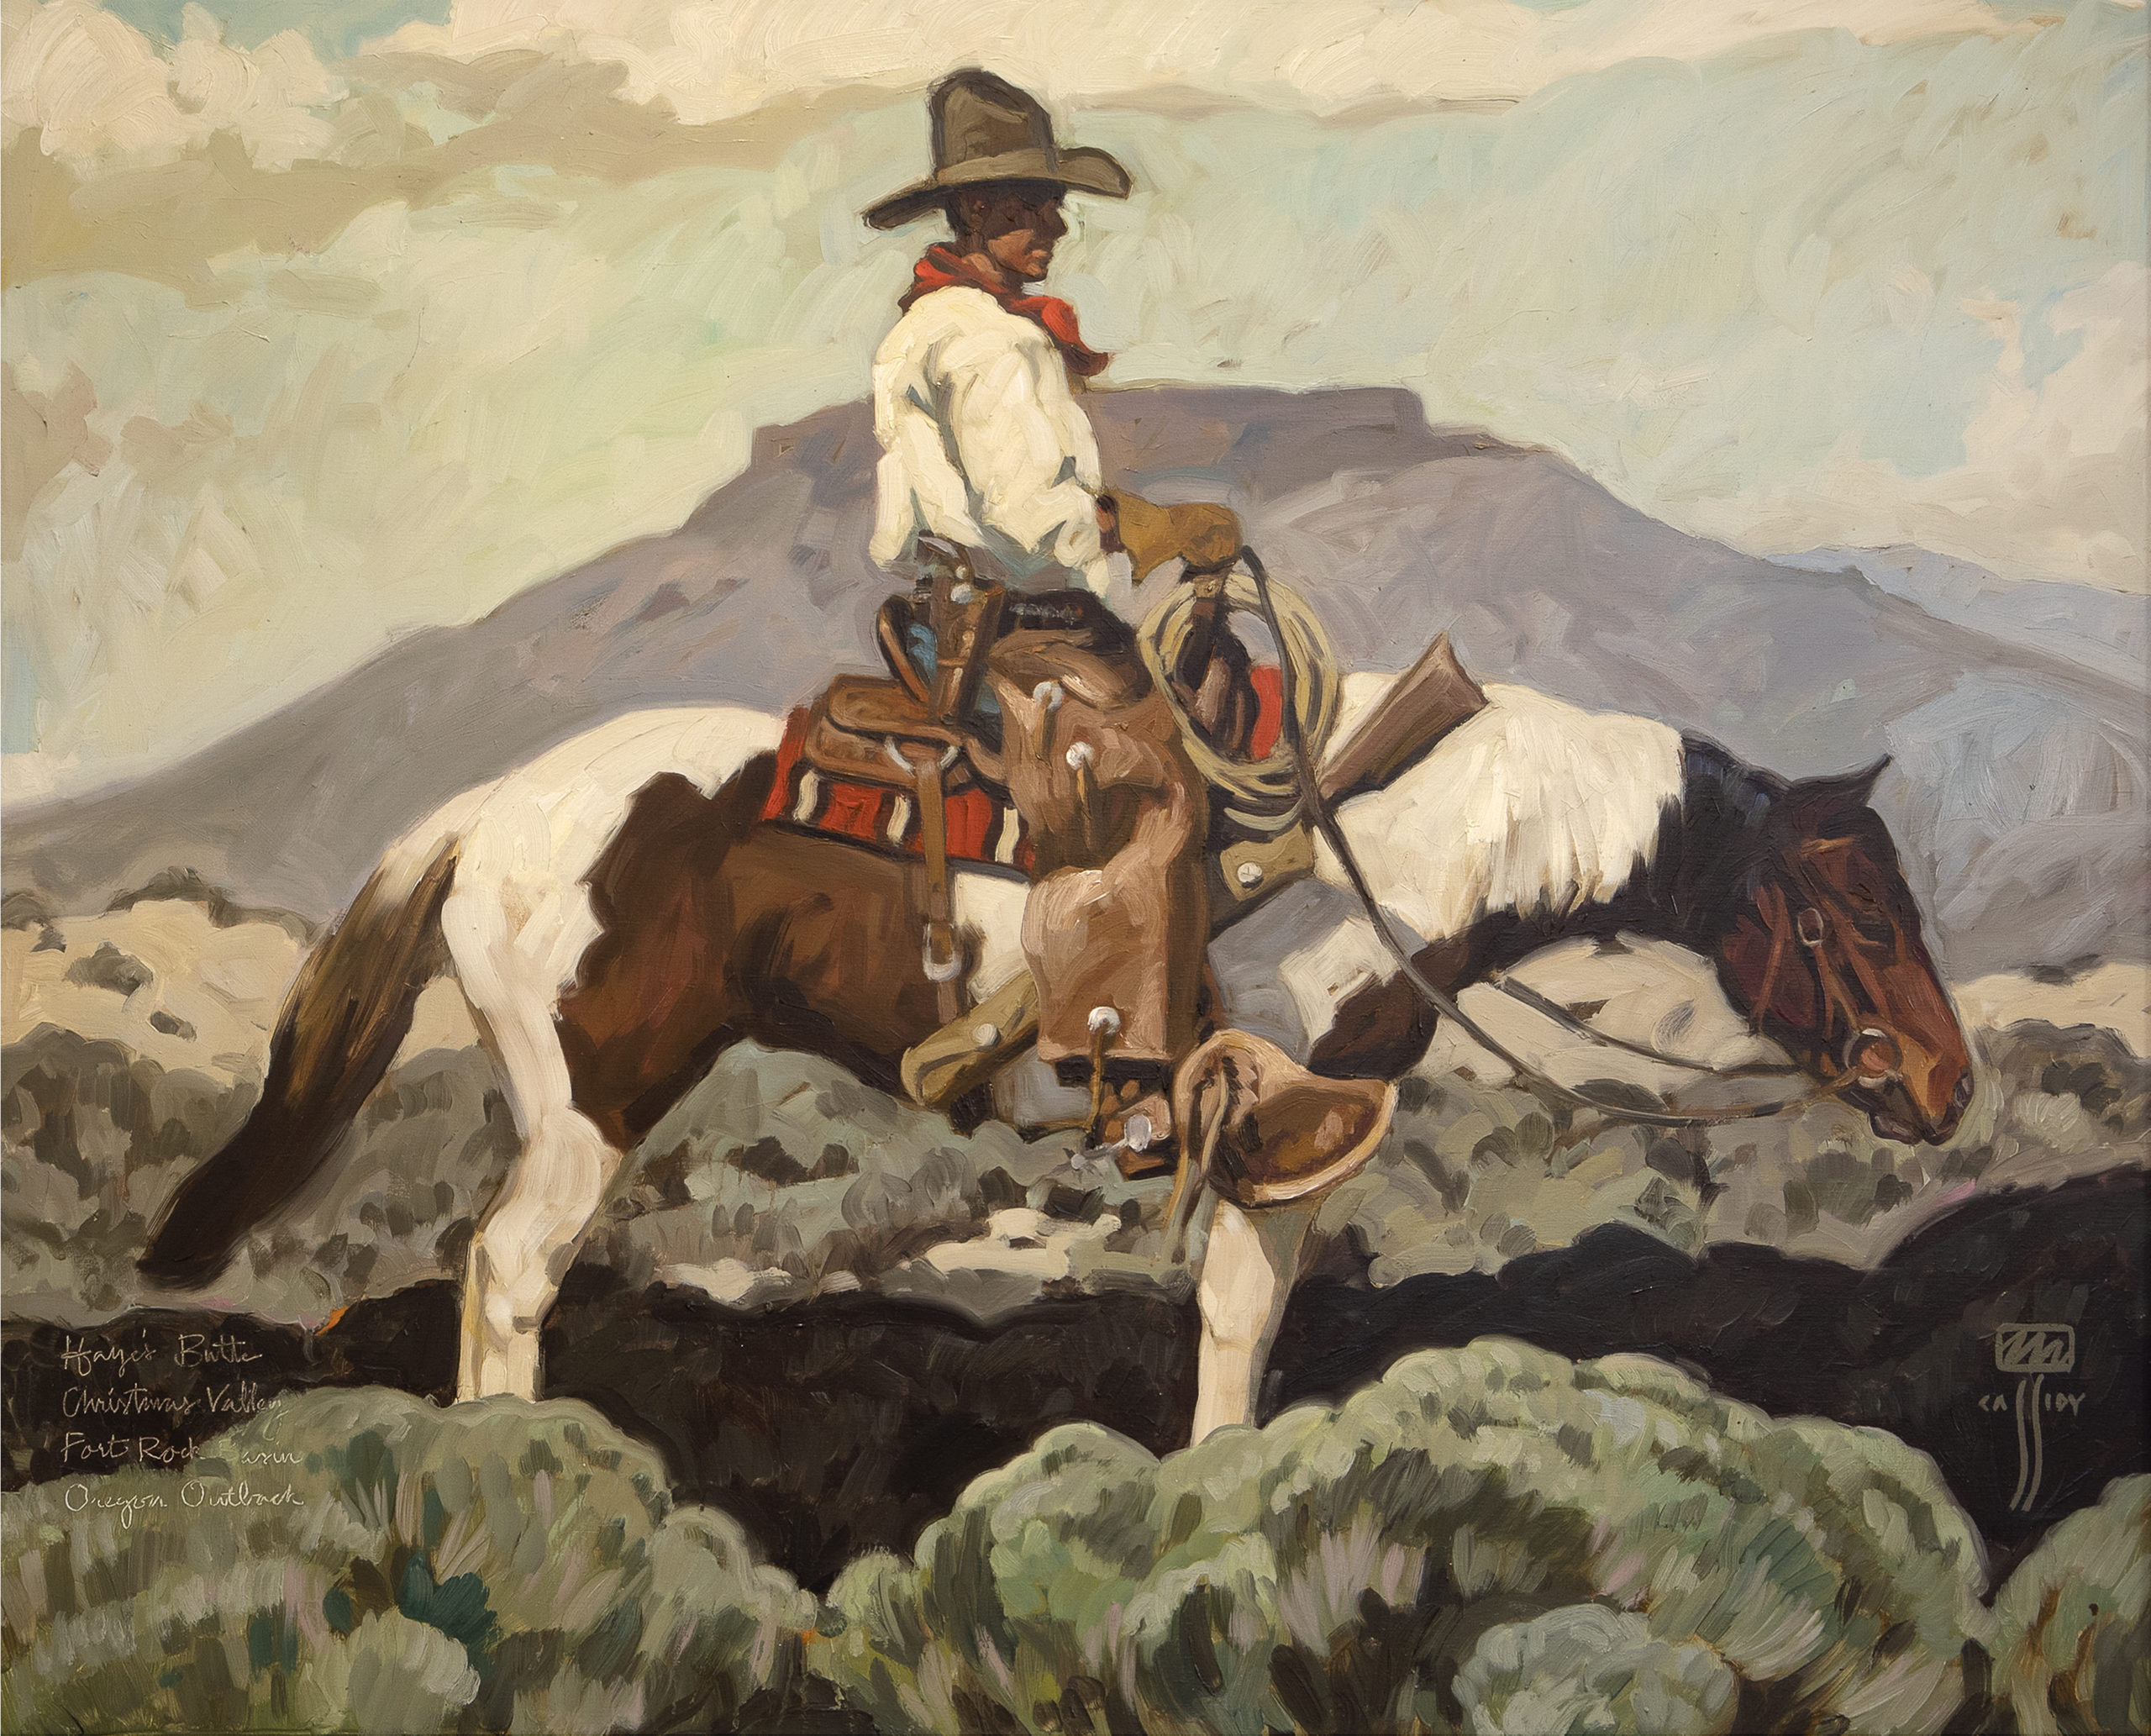 

											</b>

											<em>
												Lure of the West: Celebrating 50 Years of Gerald Peters Gallery  </em> 

											<h4>
												New York: April 29 - May 27, 2022											</h4>

		                																																<i>Michael Cassidy, Oregon Outback,</i>  
																																								2021, 
																																								oil on linen, 
																																								39 ¼ x 41 ¼ inches 
																								
		                				